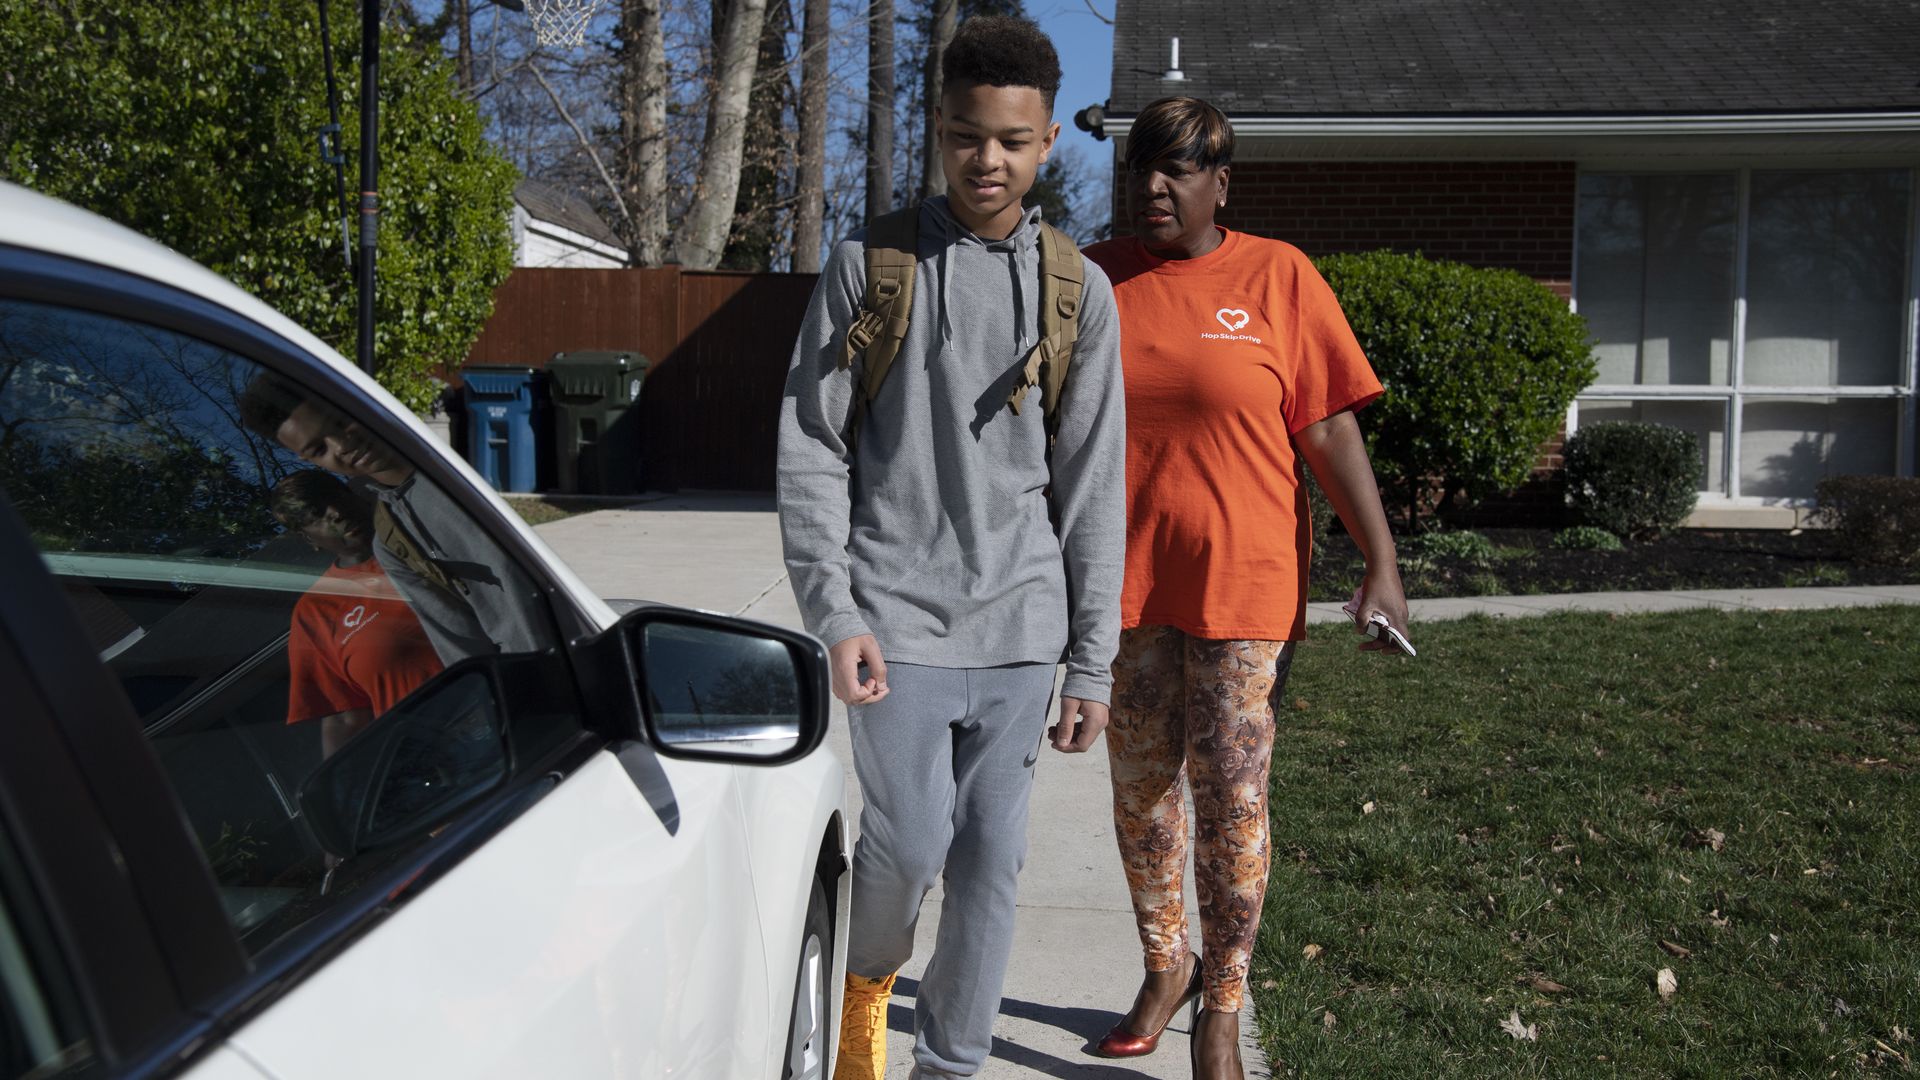 Jalen Walker heads to football practice using service from the company HopSkipDrive with driver Jacqueline Bouknight in Springfield, Virginia 